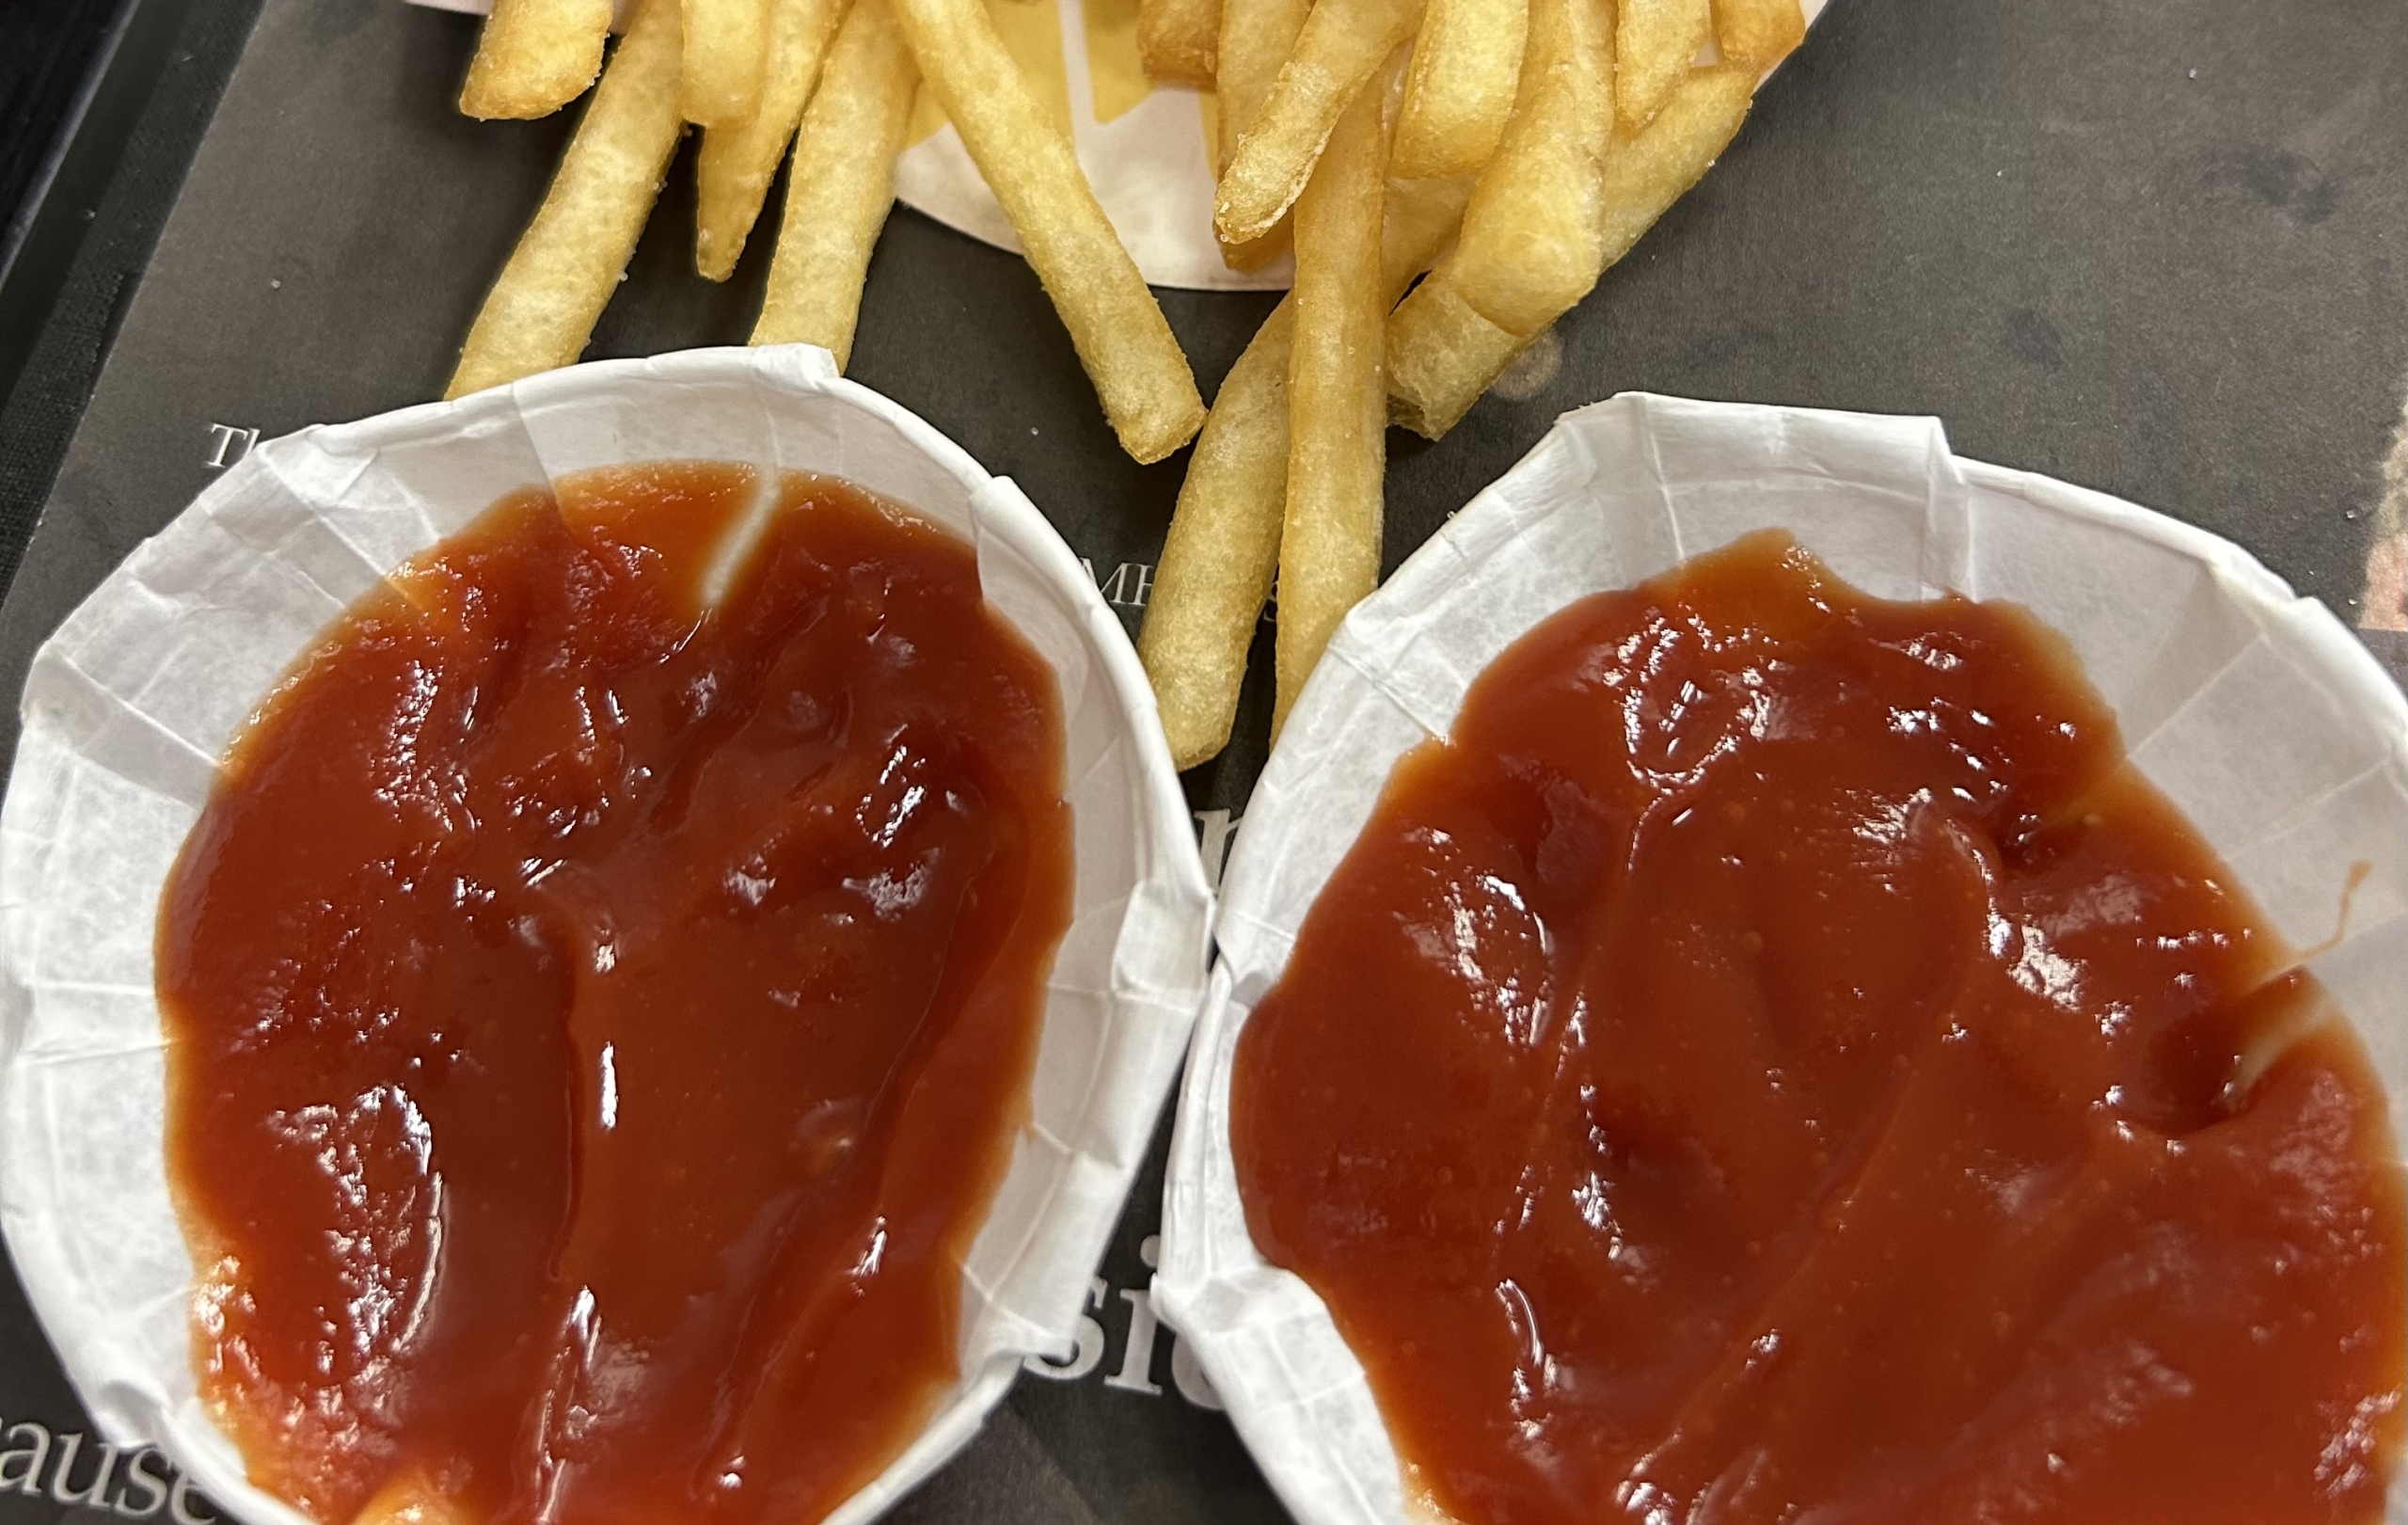 Reader learns a new fast food hack (Thanks, Eddie!)